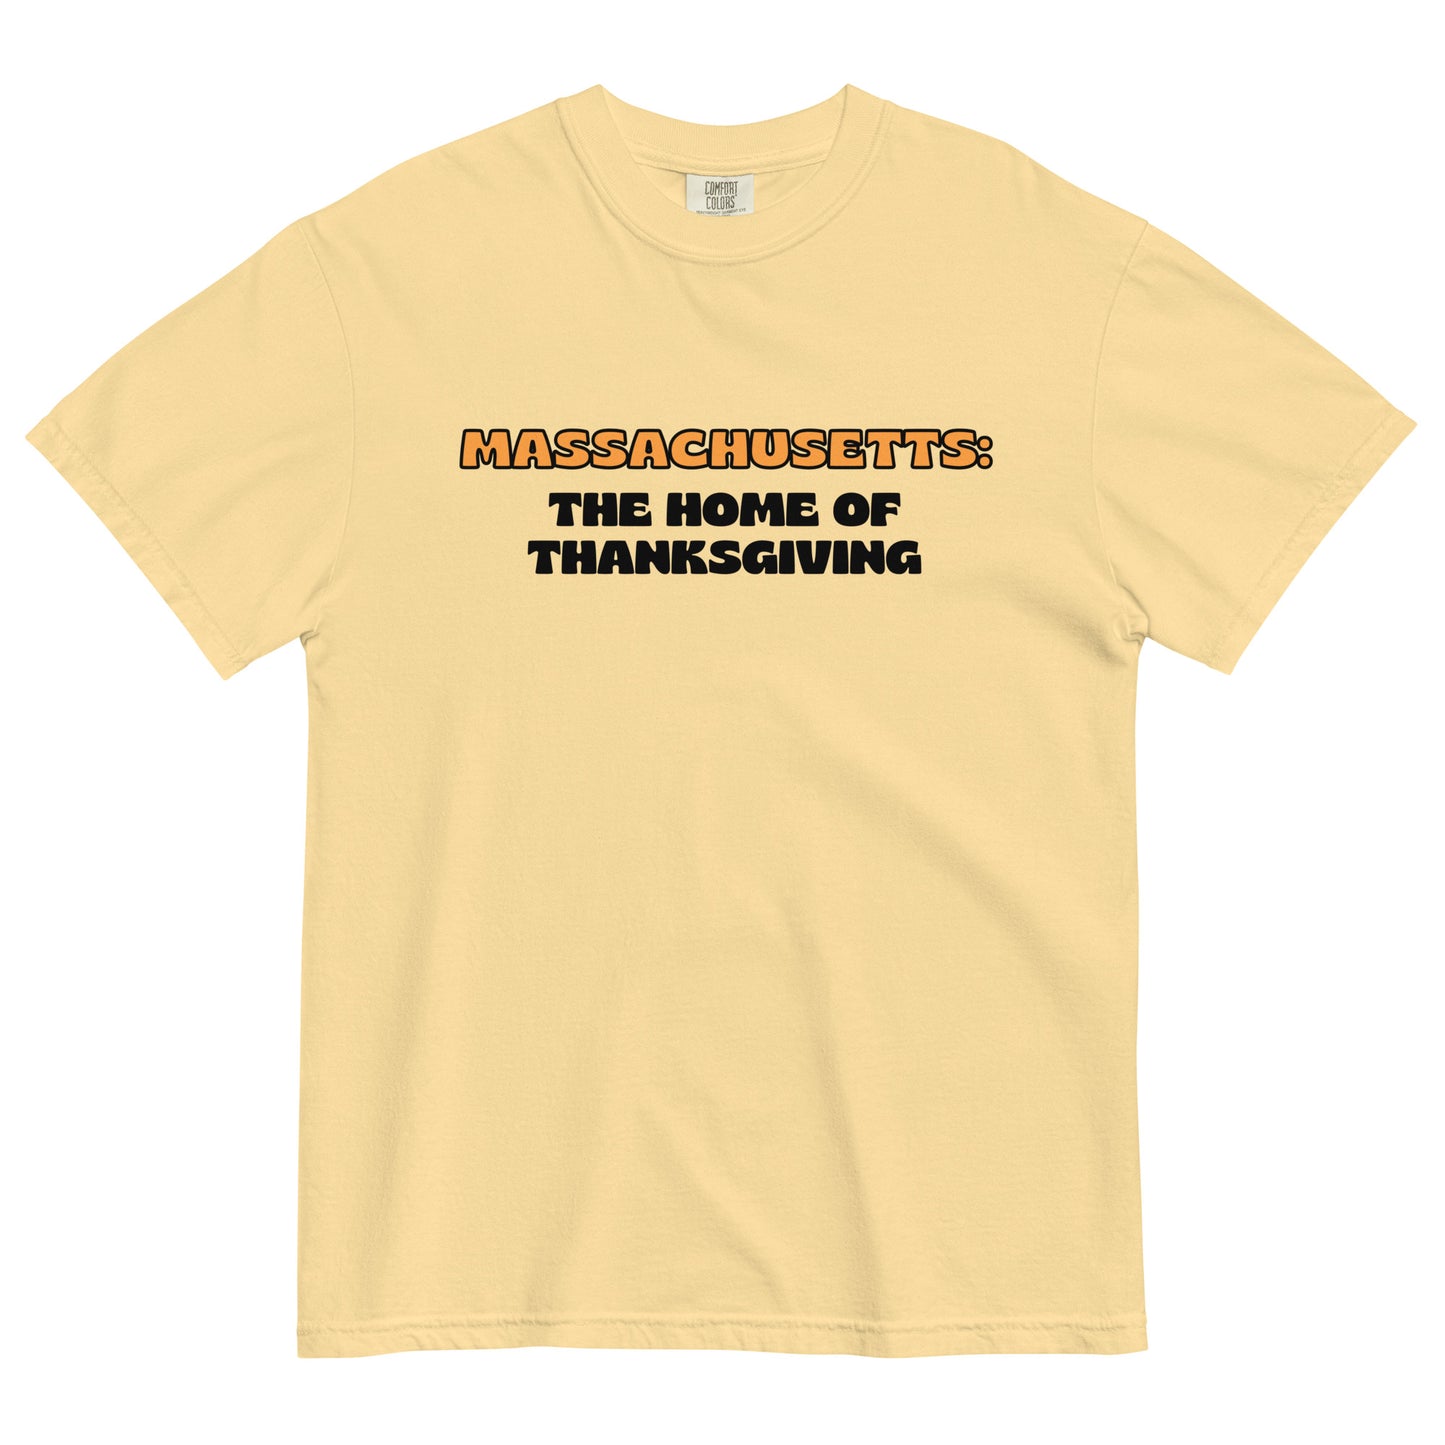 The Home of Thanksgiving T-Shirt